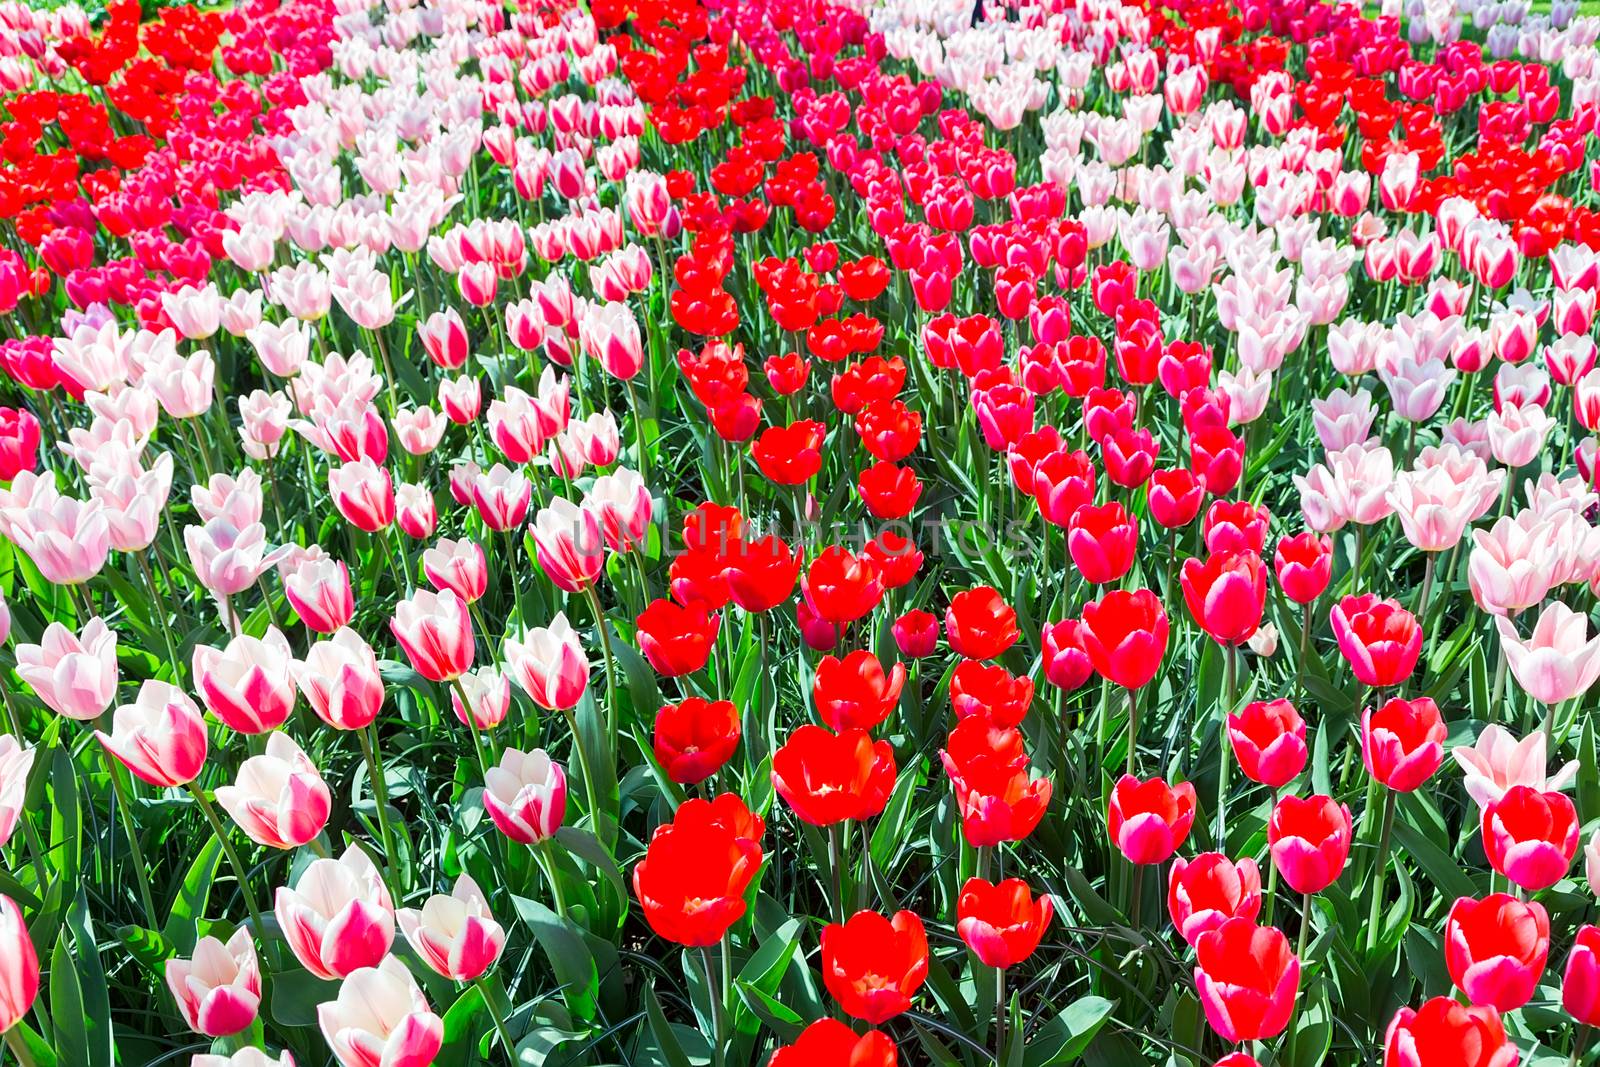 Tulip field with various red tulips in rows by BenSchonewille